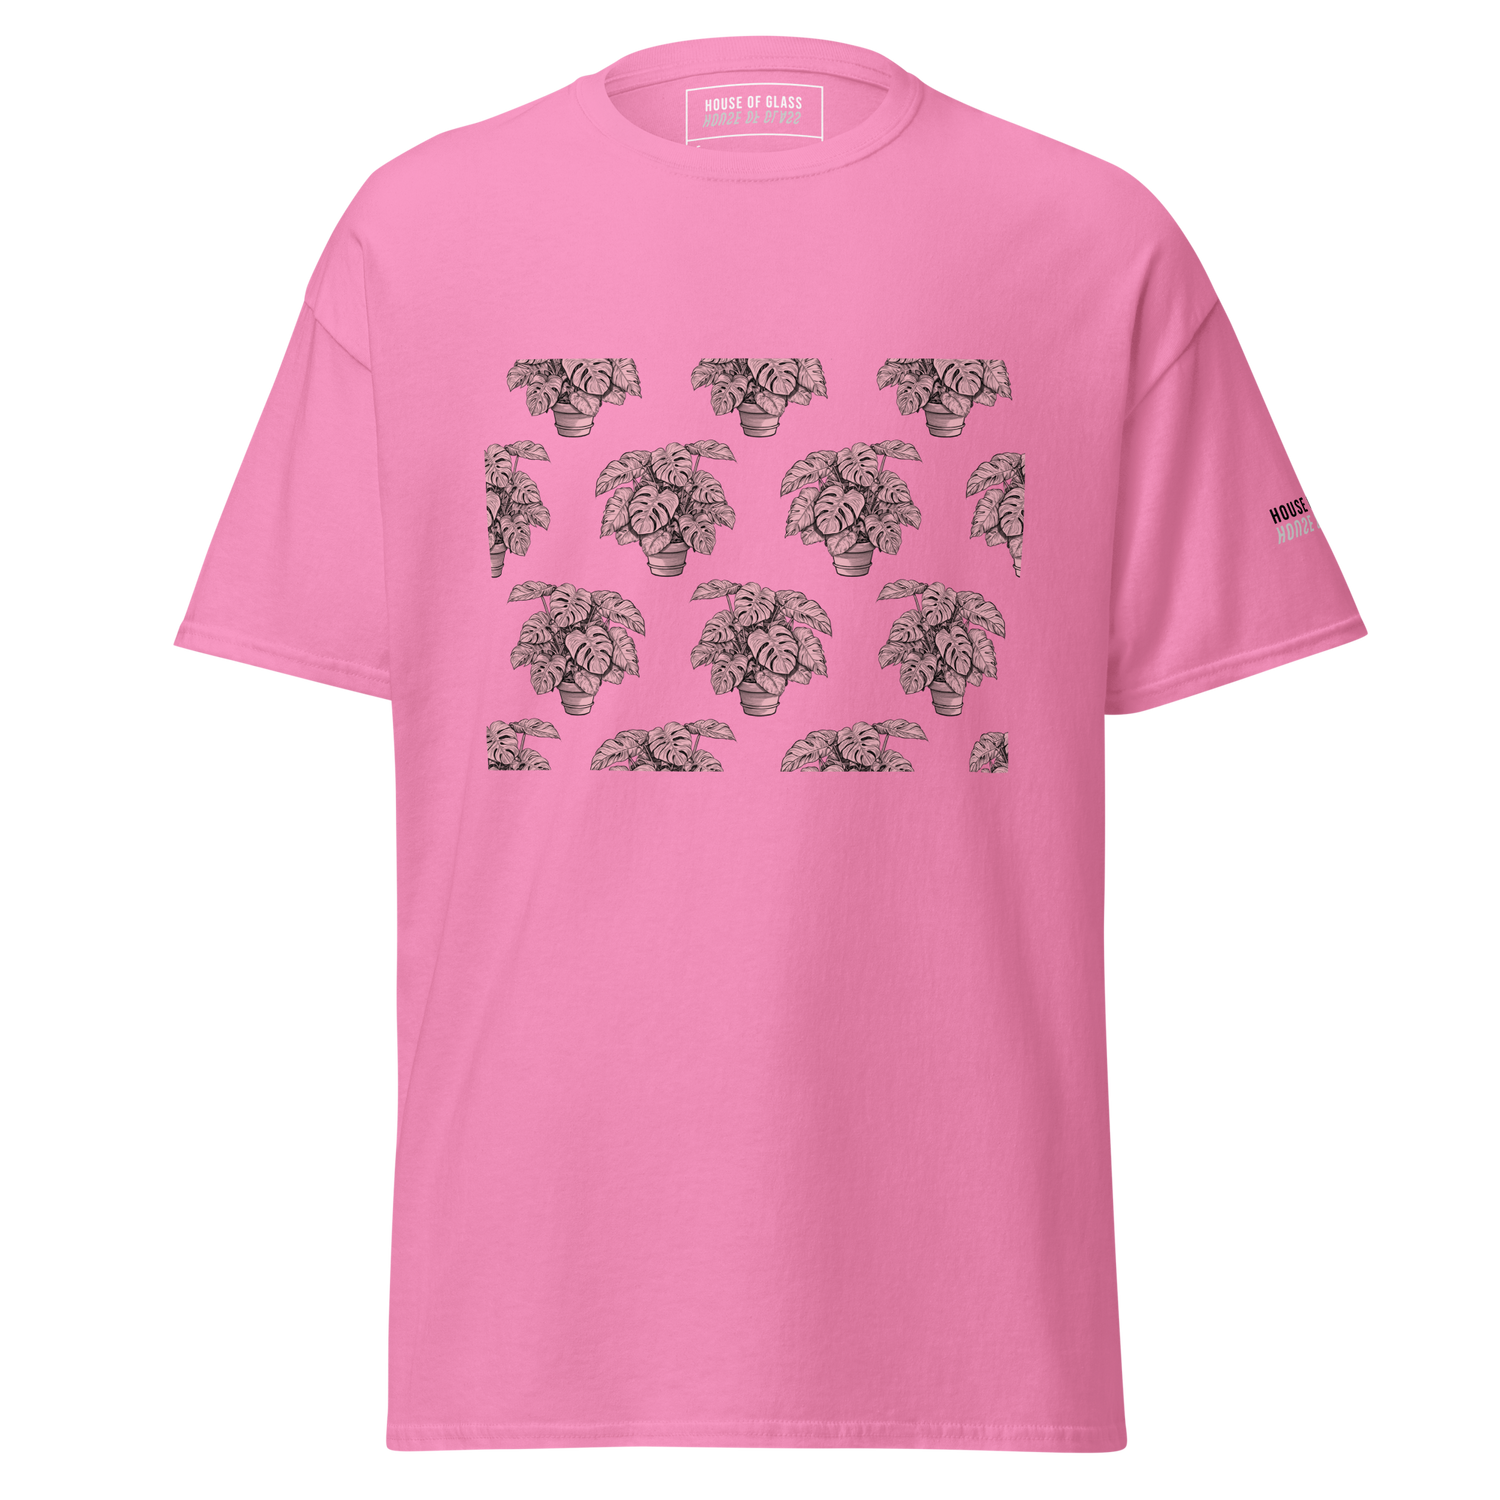 Ghost style front facing T-shirt mockup of a pink short sleeve t-shirt from the House of Glass Pride Collection. The design features a recurring pattern of a black and white potted monstera on the centre front.